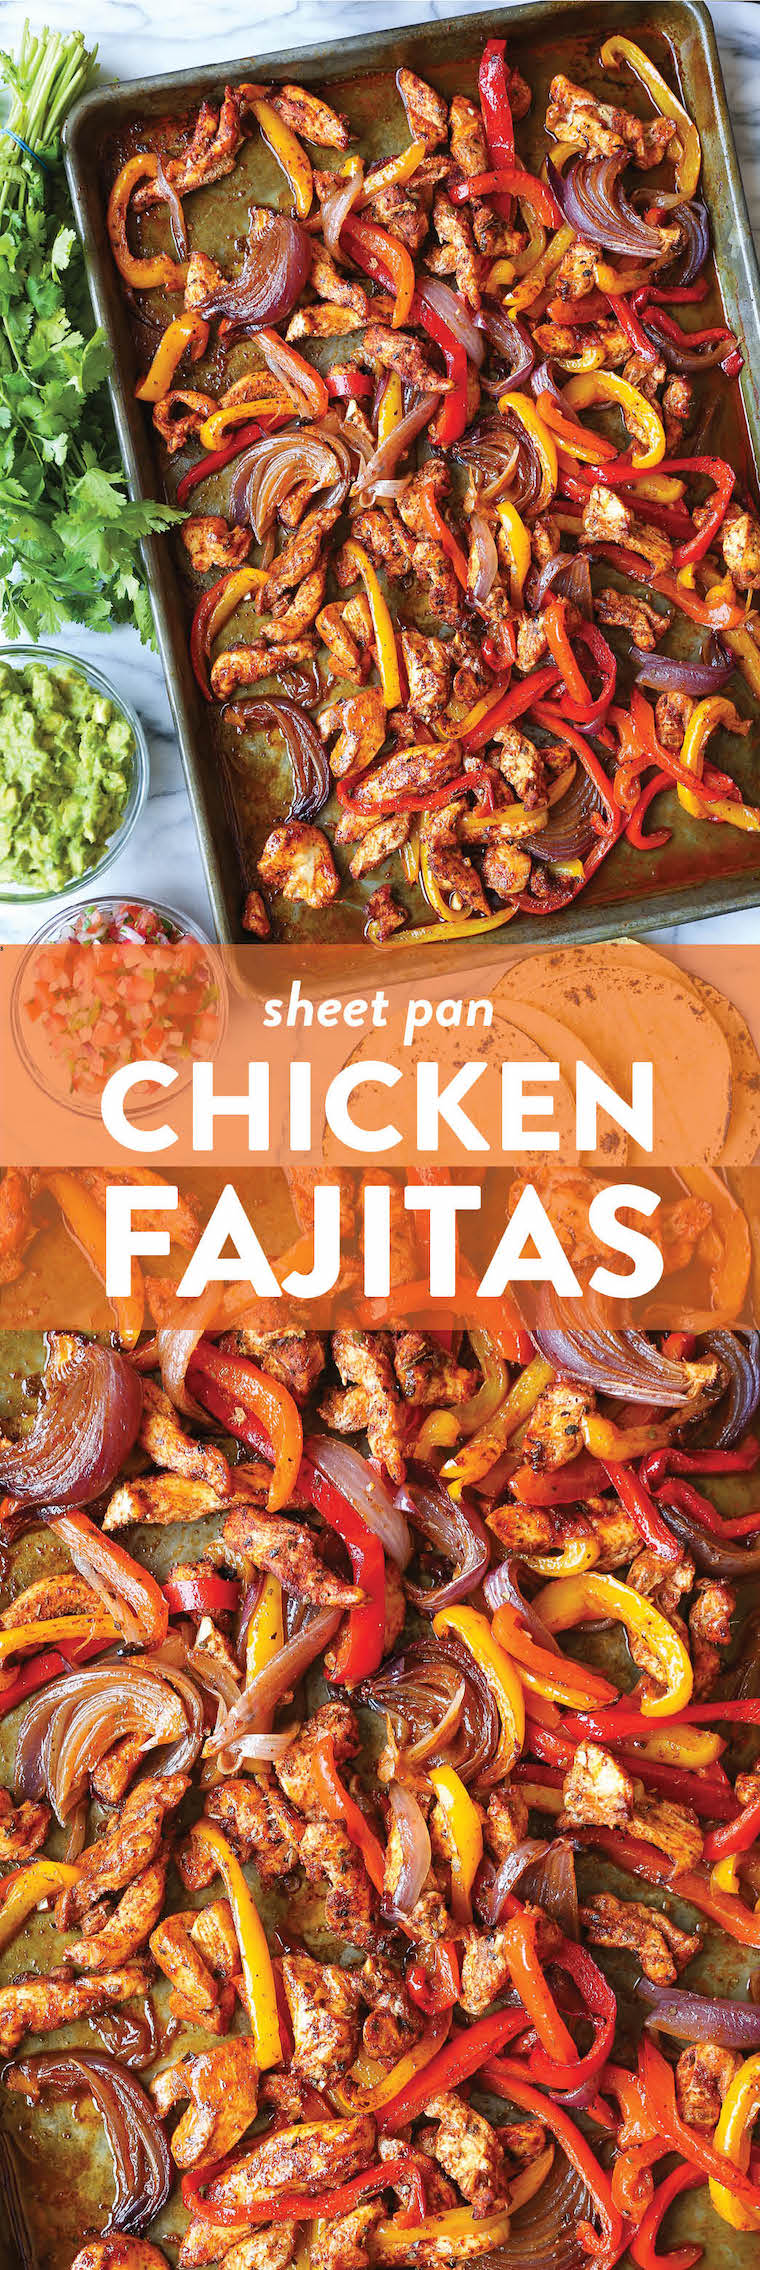 Adult AND Kid Approved One Skillet Chicken Fajitas [+ Video] - Oh